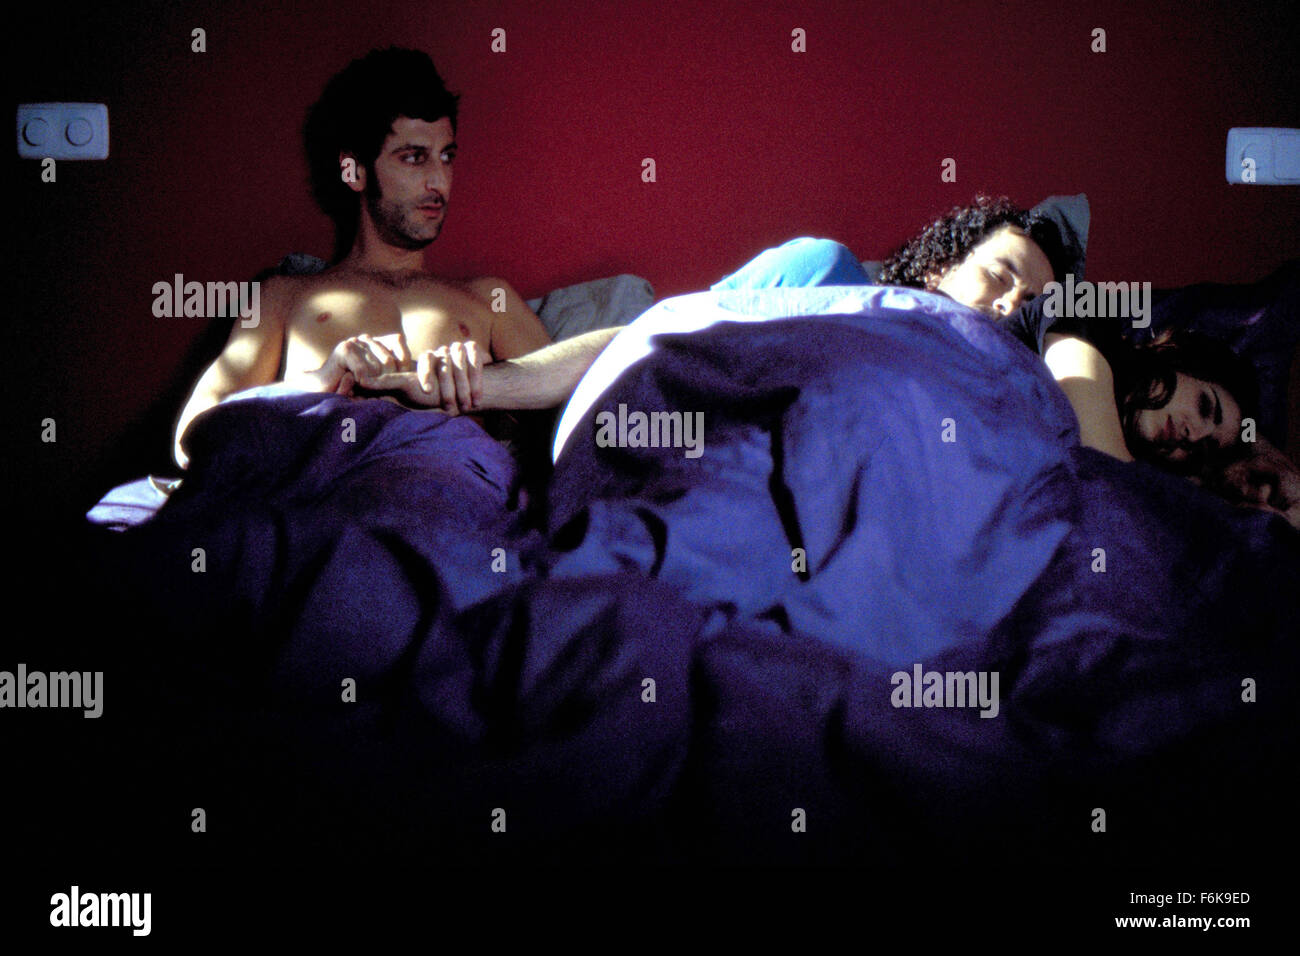 RELEASE DATE: December 21, 2005. MOVIE TITLE: The Two Sides of the Bed. STUDIO: Telespan 2000. PLOT: Three years have passed and the boys seem to have matured. Javier (Alterio) is going to marry Marta (Sanchez) and Pedro (Toledo) is very much in love with his new girlfriend Raquel (Jimenez). Rafa (San Juan) has also found happiness with Pilar (Esteve), who loves him too and treats him in a very particular way. Everything seems perfect, but Marta and Raquel have different plans that will put their relationship with their boyfriends in danger. Even Pilar has got a lover and is being unfaithful t Stock Photo